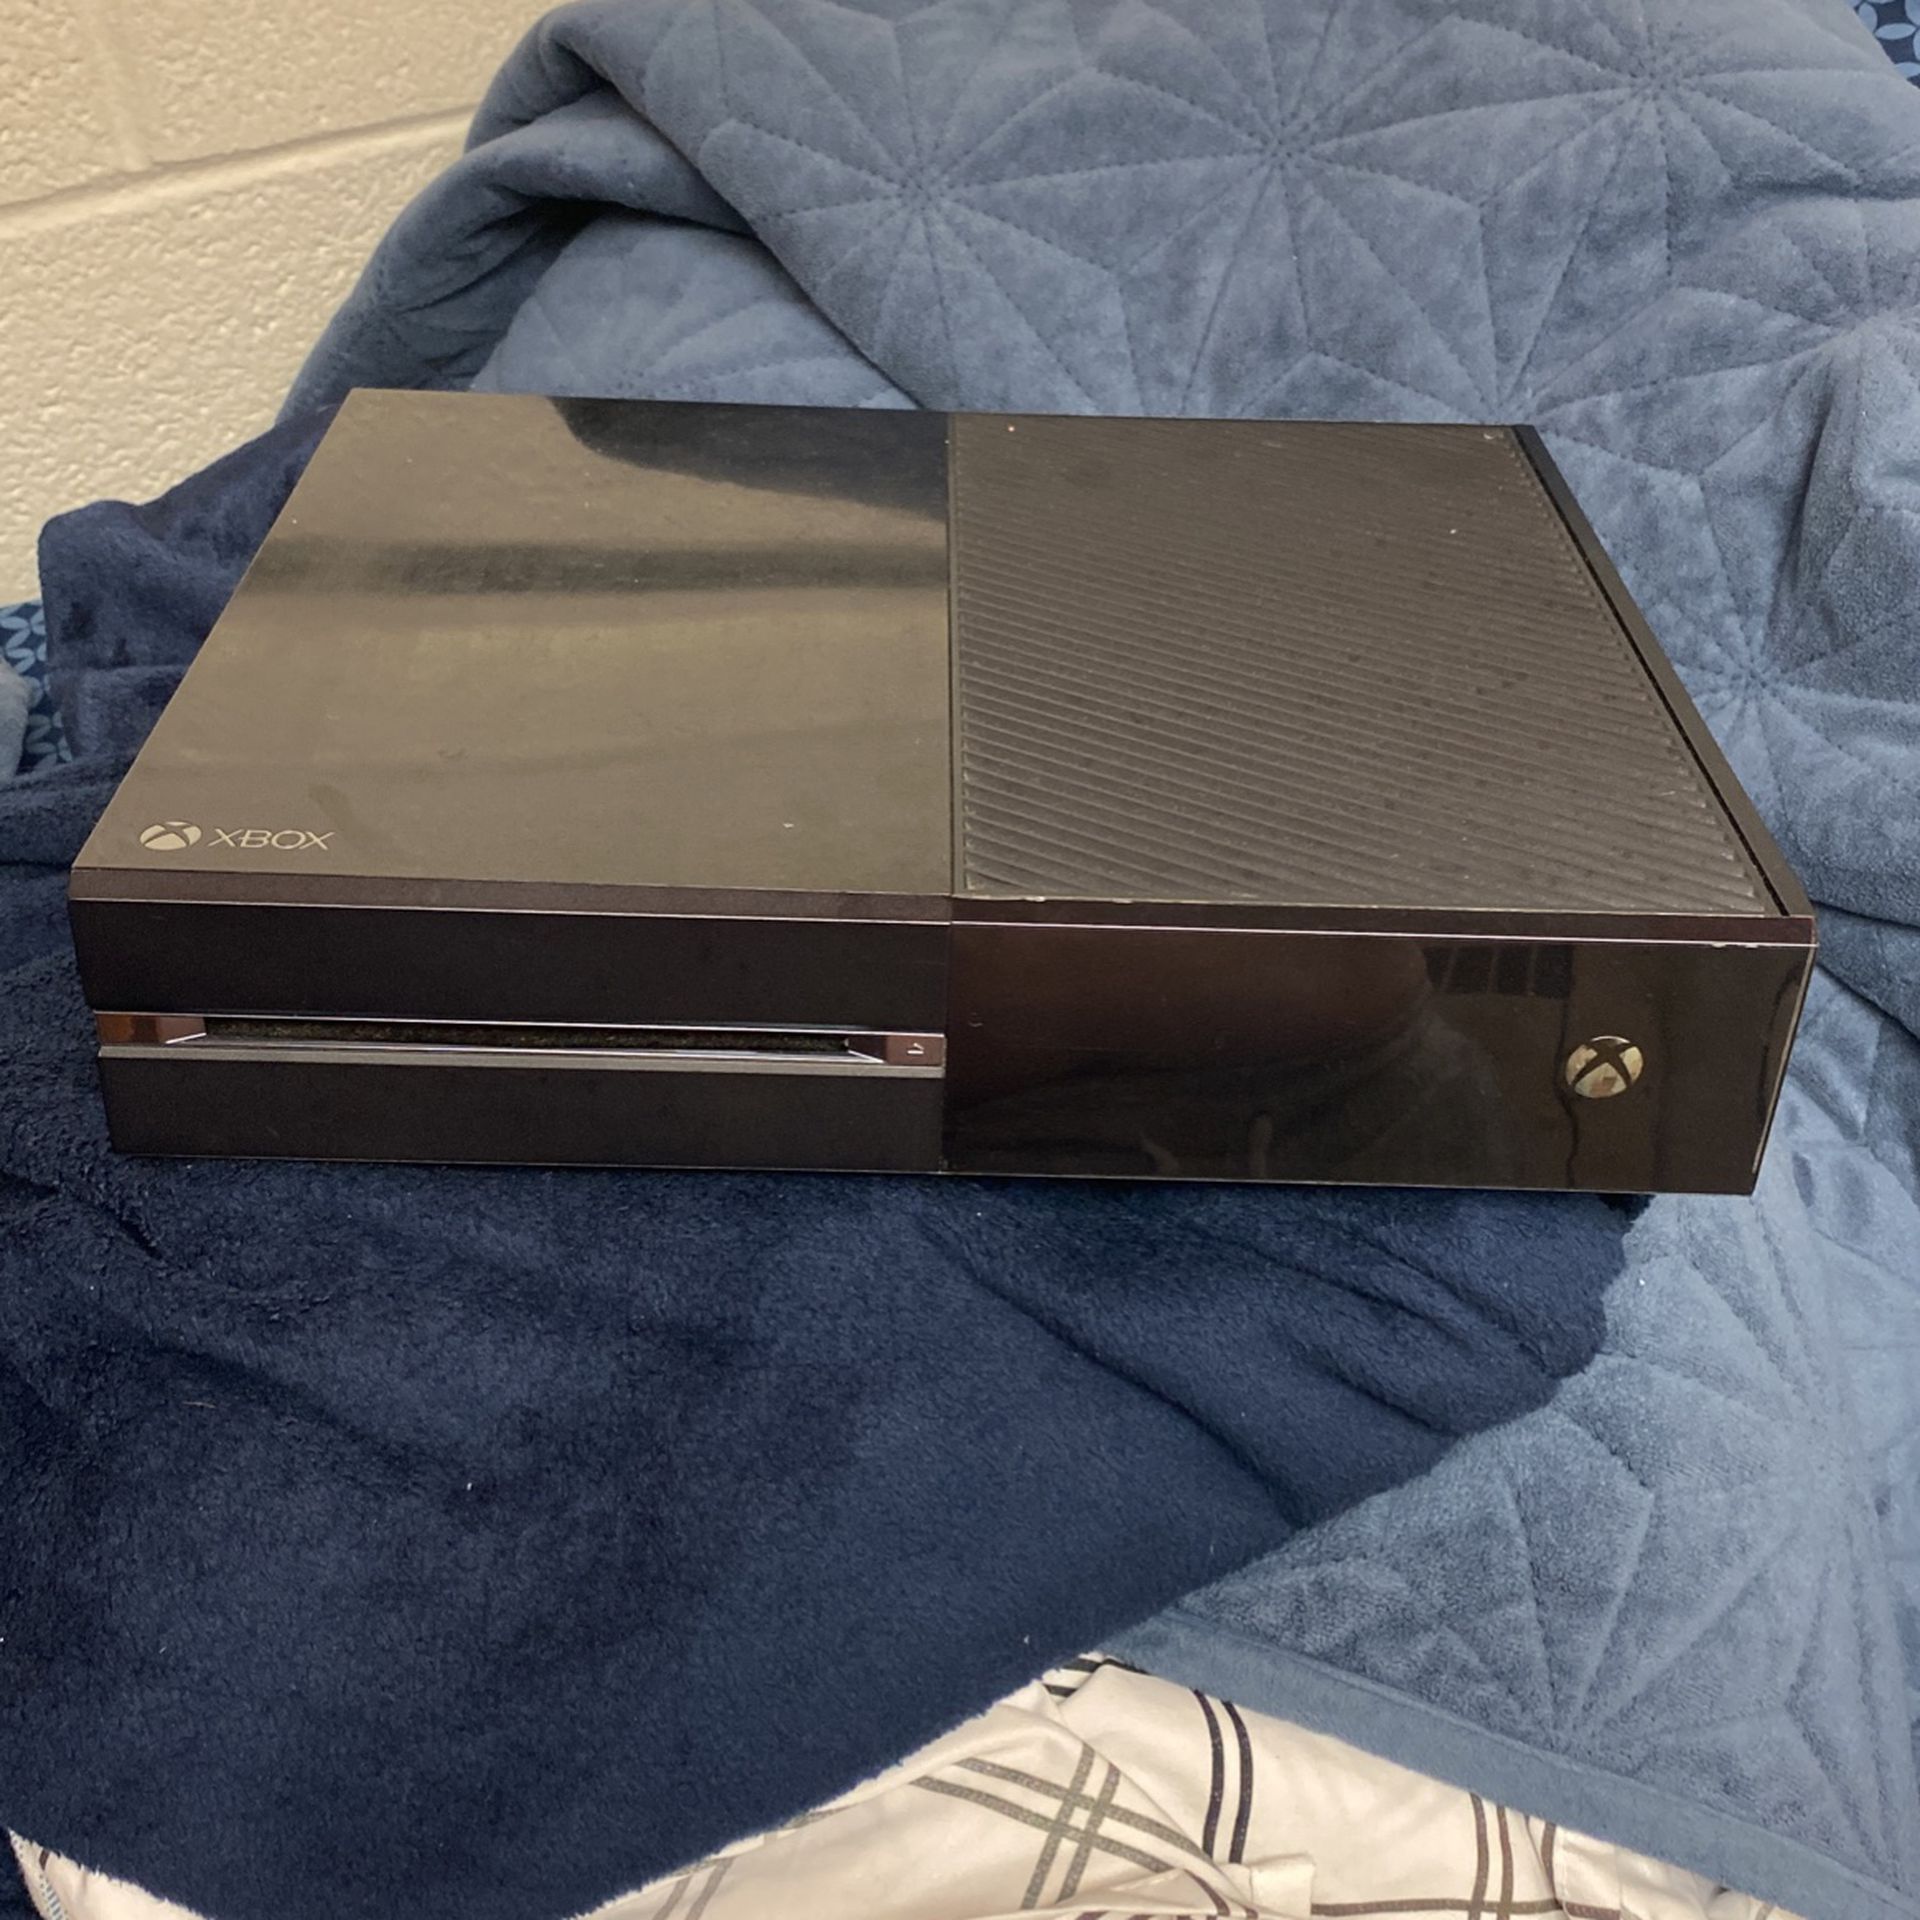 Xbox 1 for sale w/ games/controllers